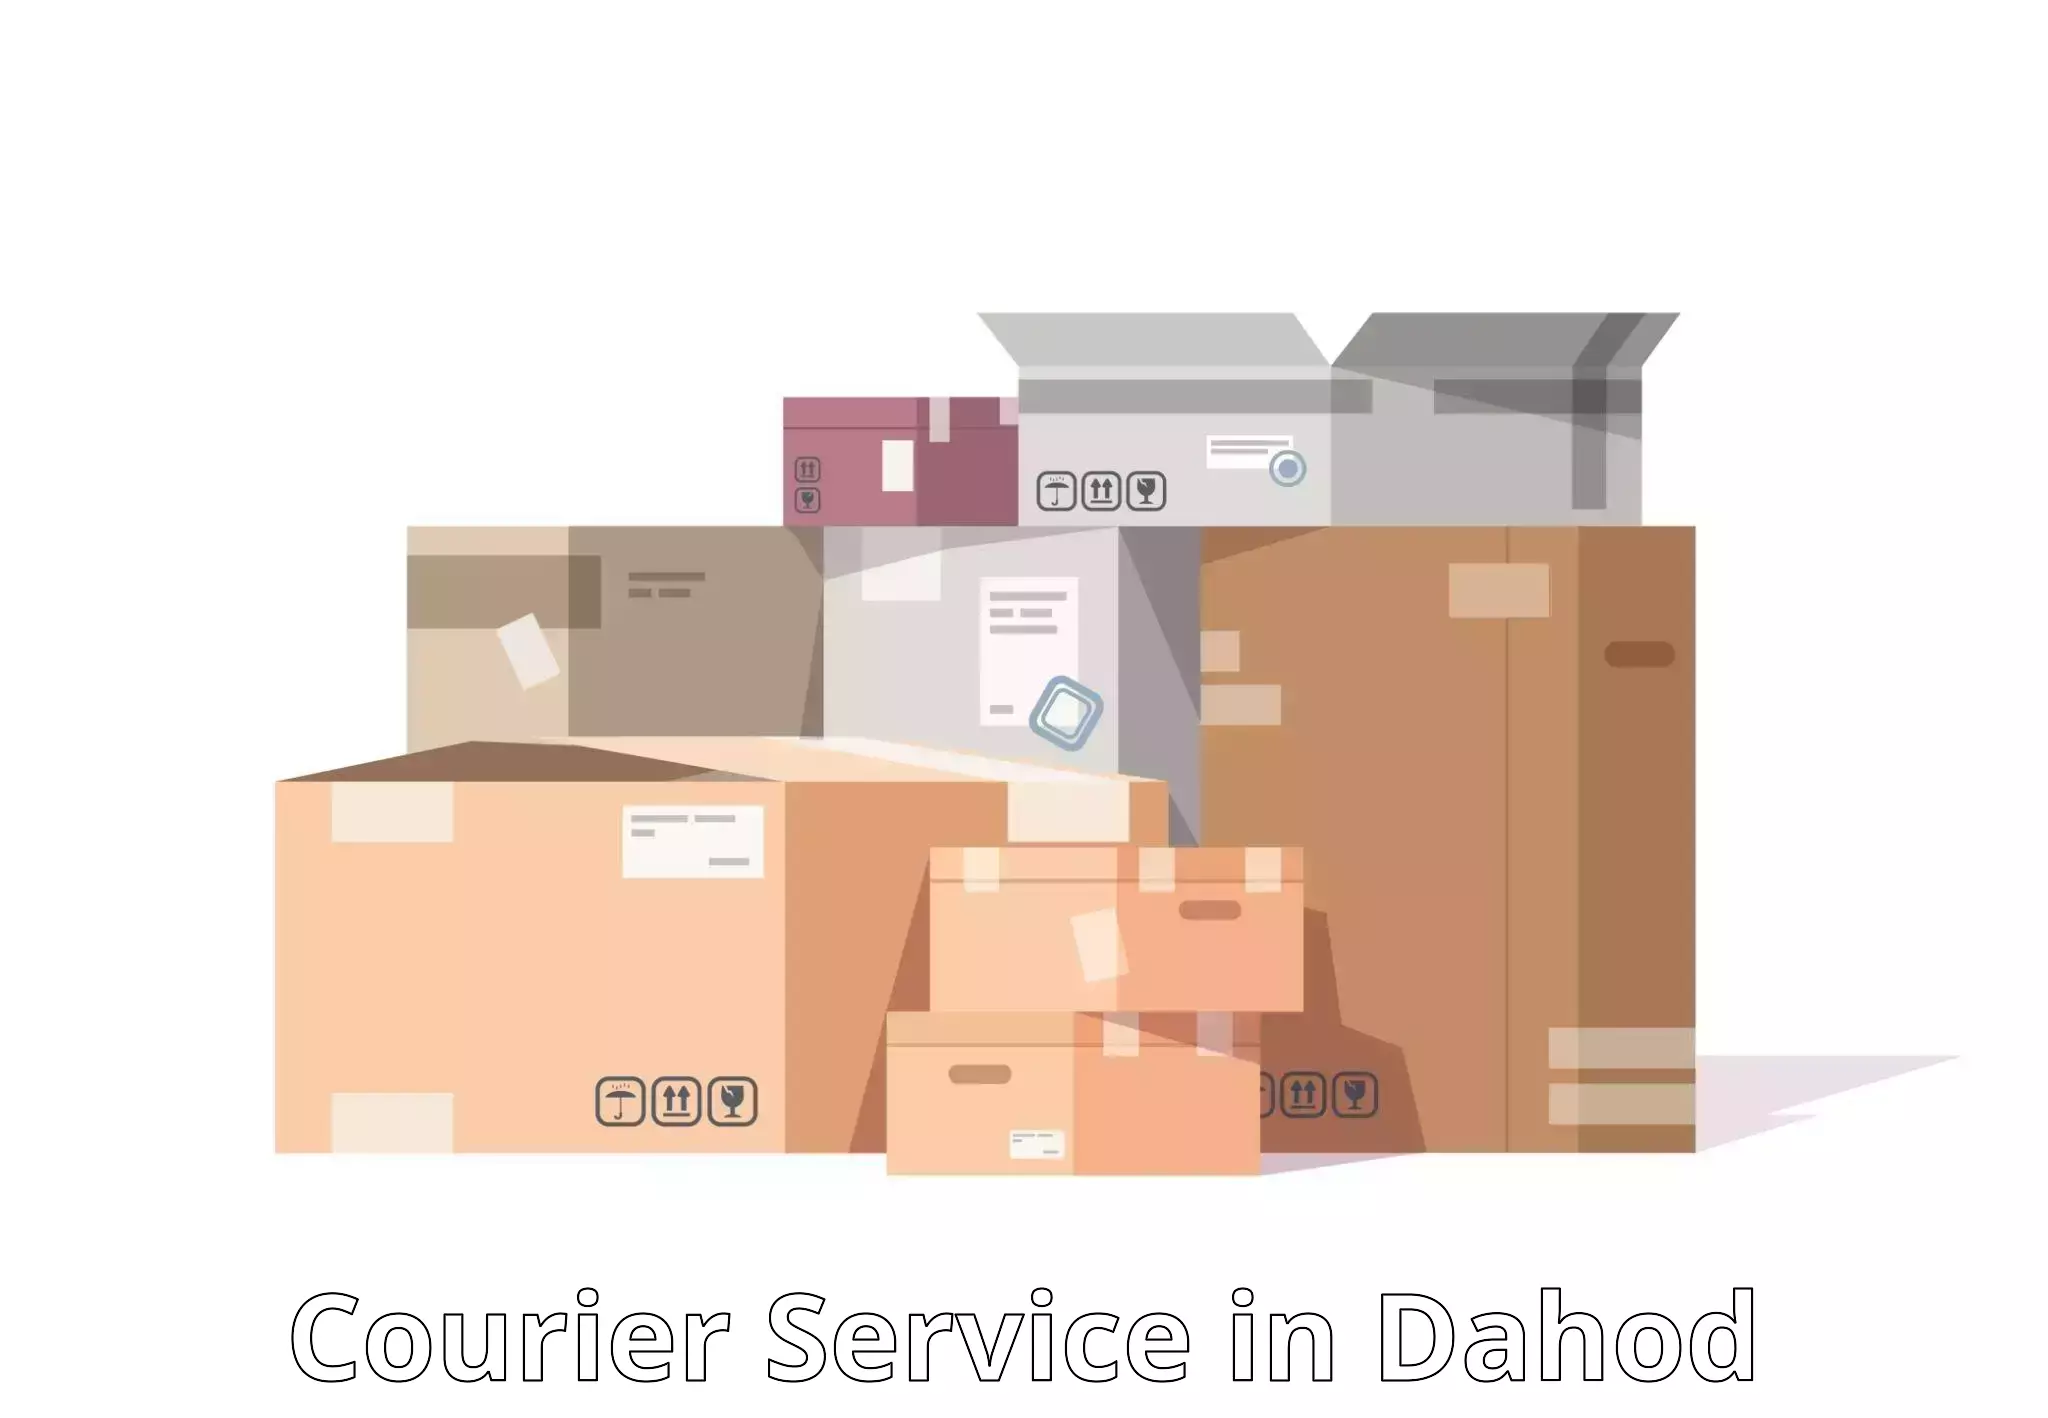 Courier service booking in Dahod